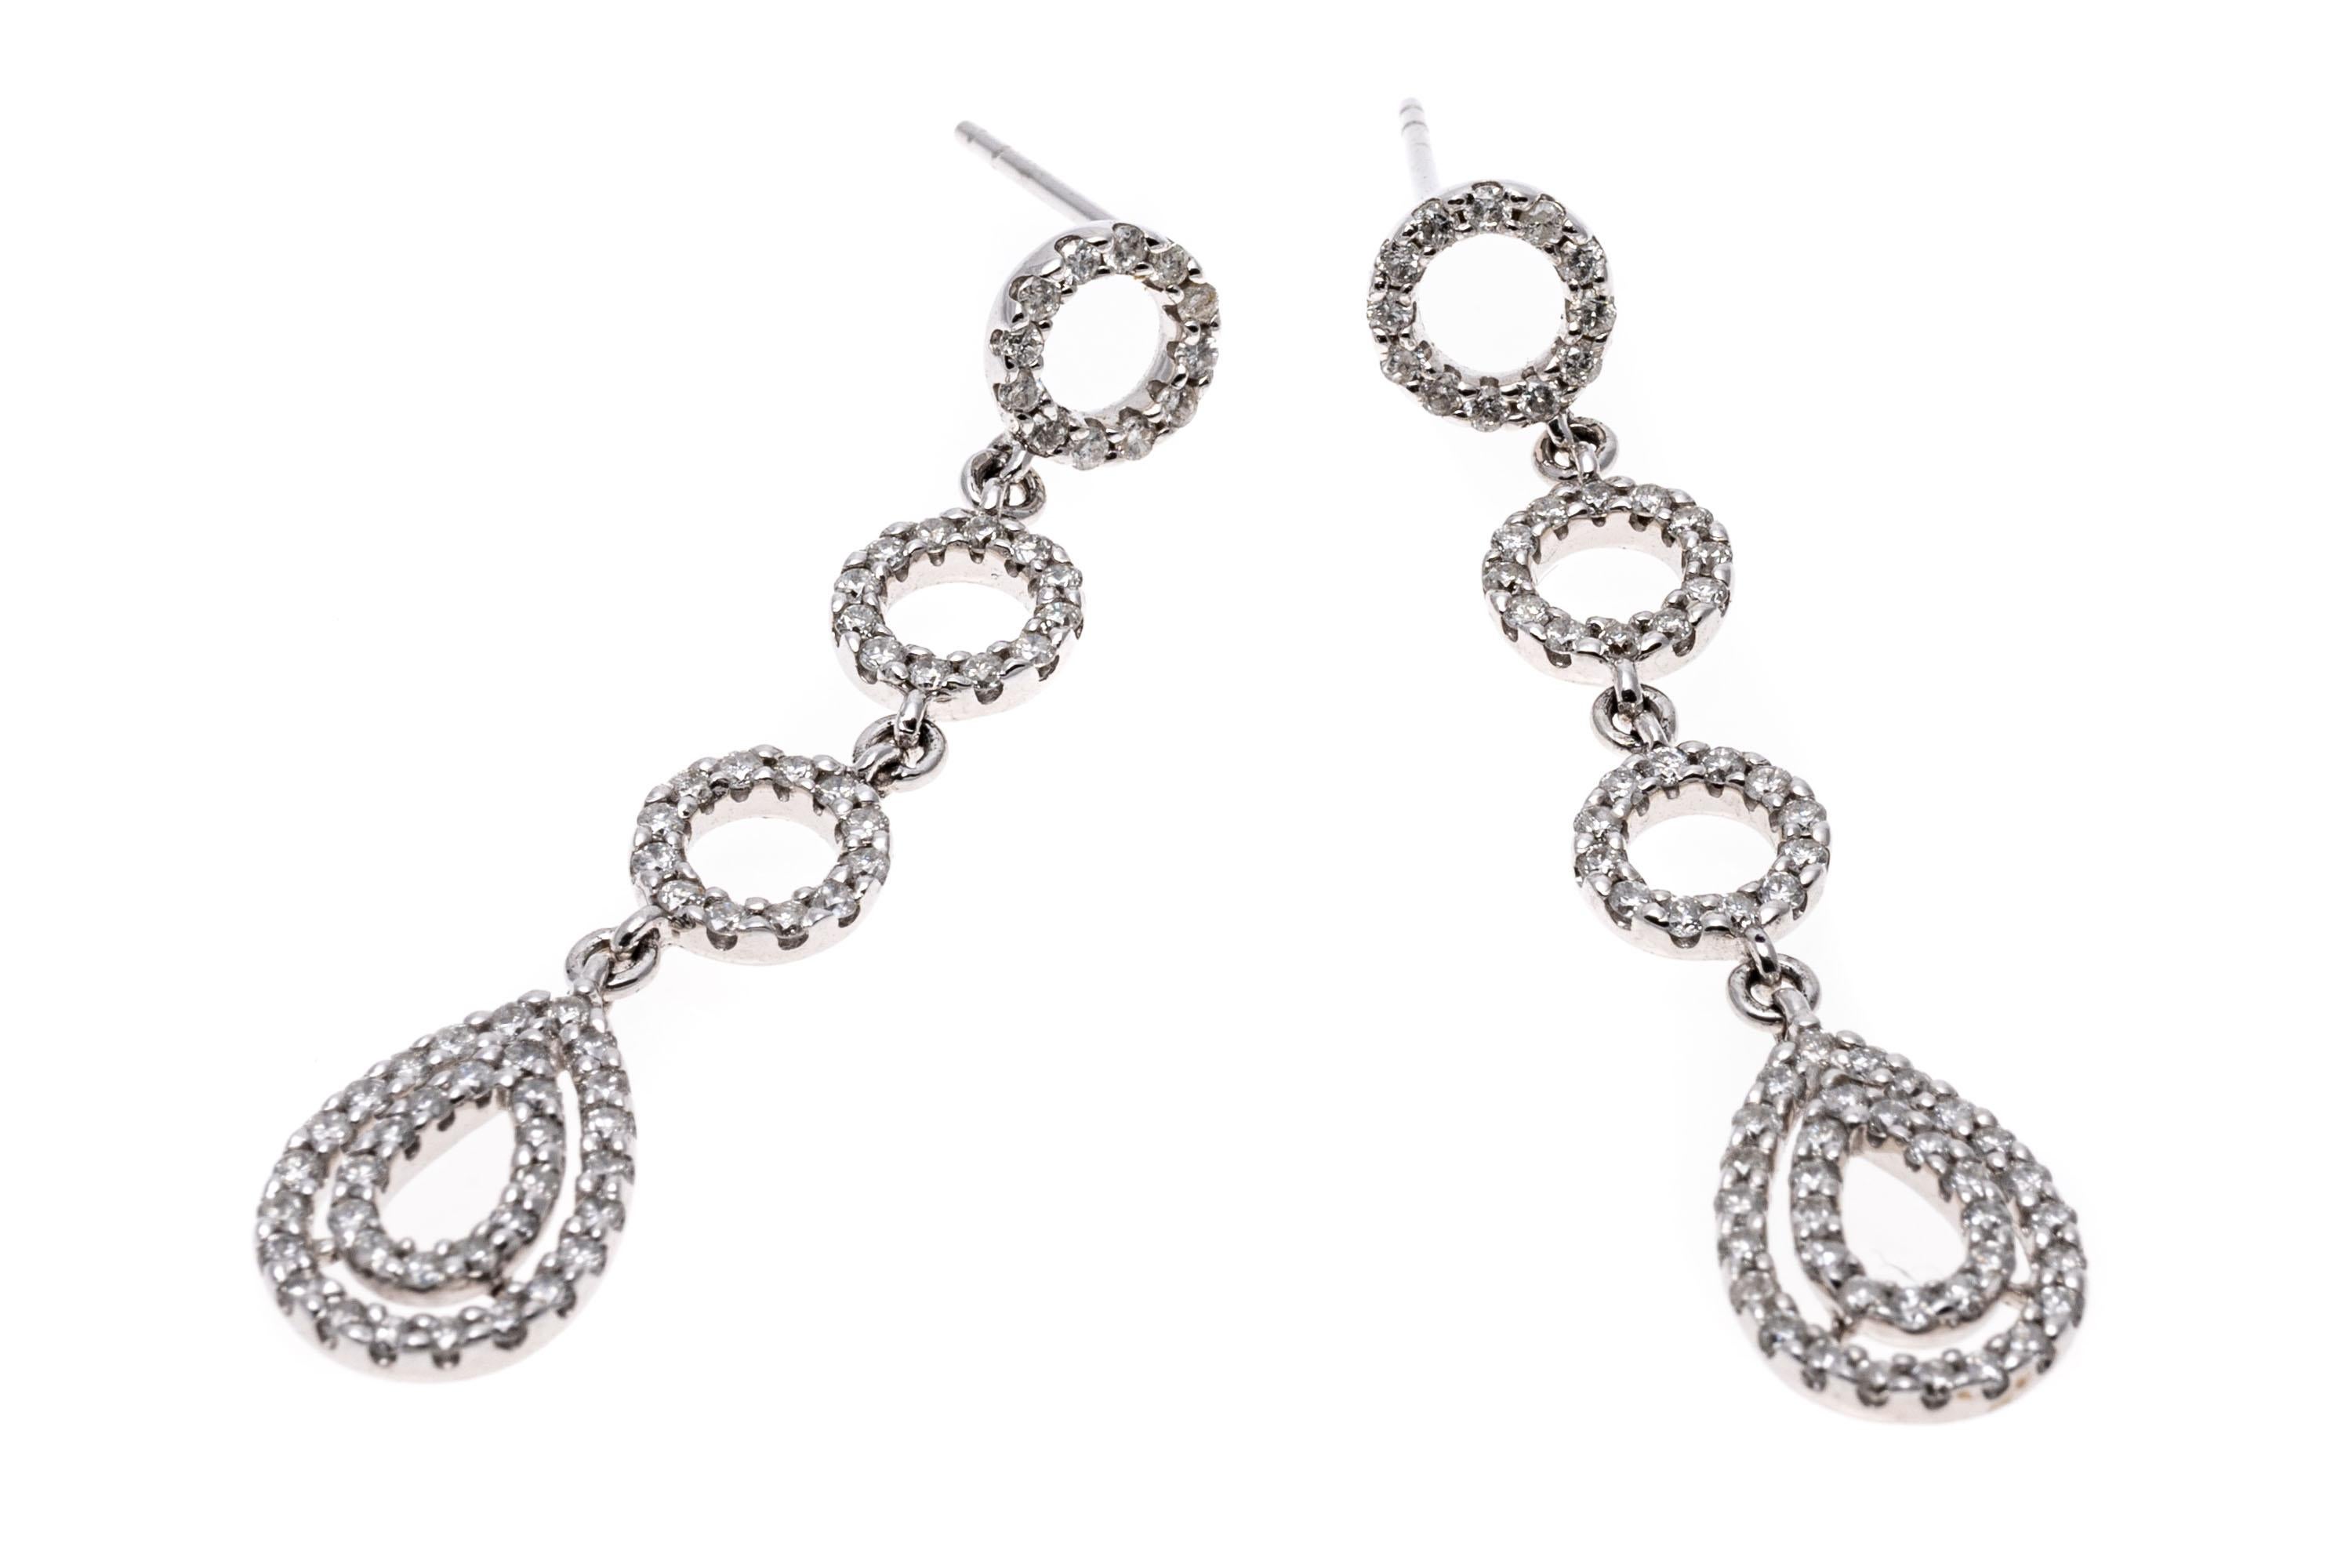 The glittering drop earrings are constructed of 14K white gold. Three circles set with diamonds leading down to a double teardrop form also set with diamonds. Earrings have post and clutch backings. Diamonds are approximately 1.05 TCW.
Marks: 14K